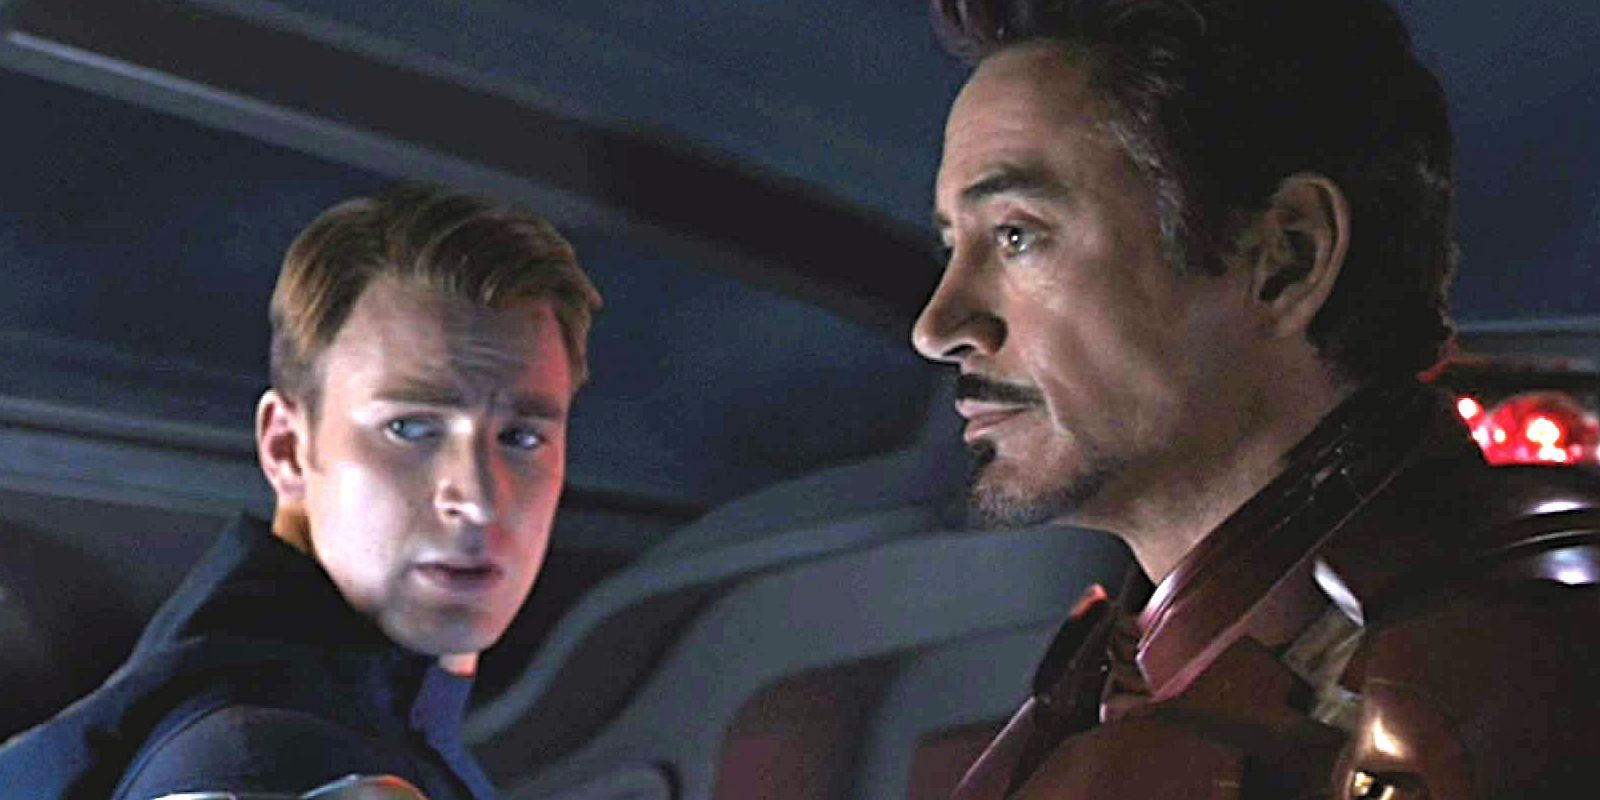 Steve Rogers and Tony Stark looking serious in the MCU